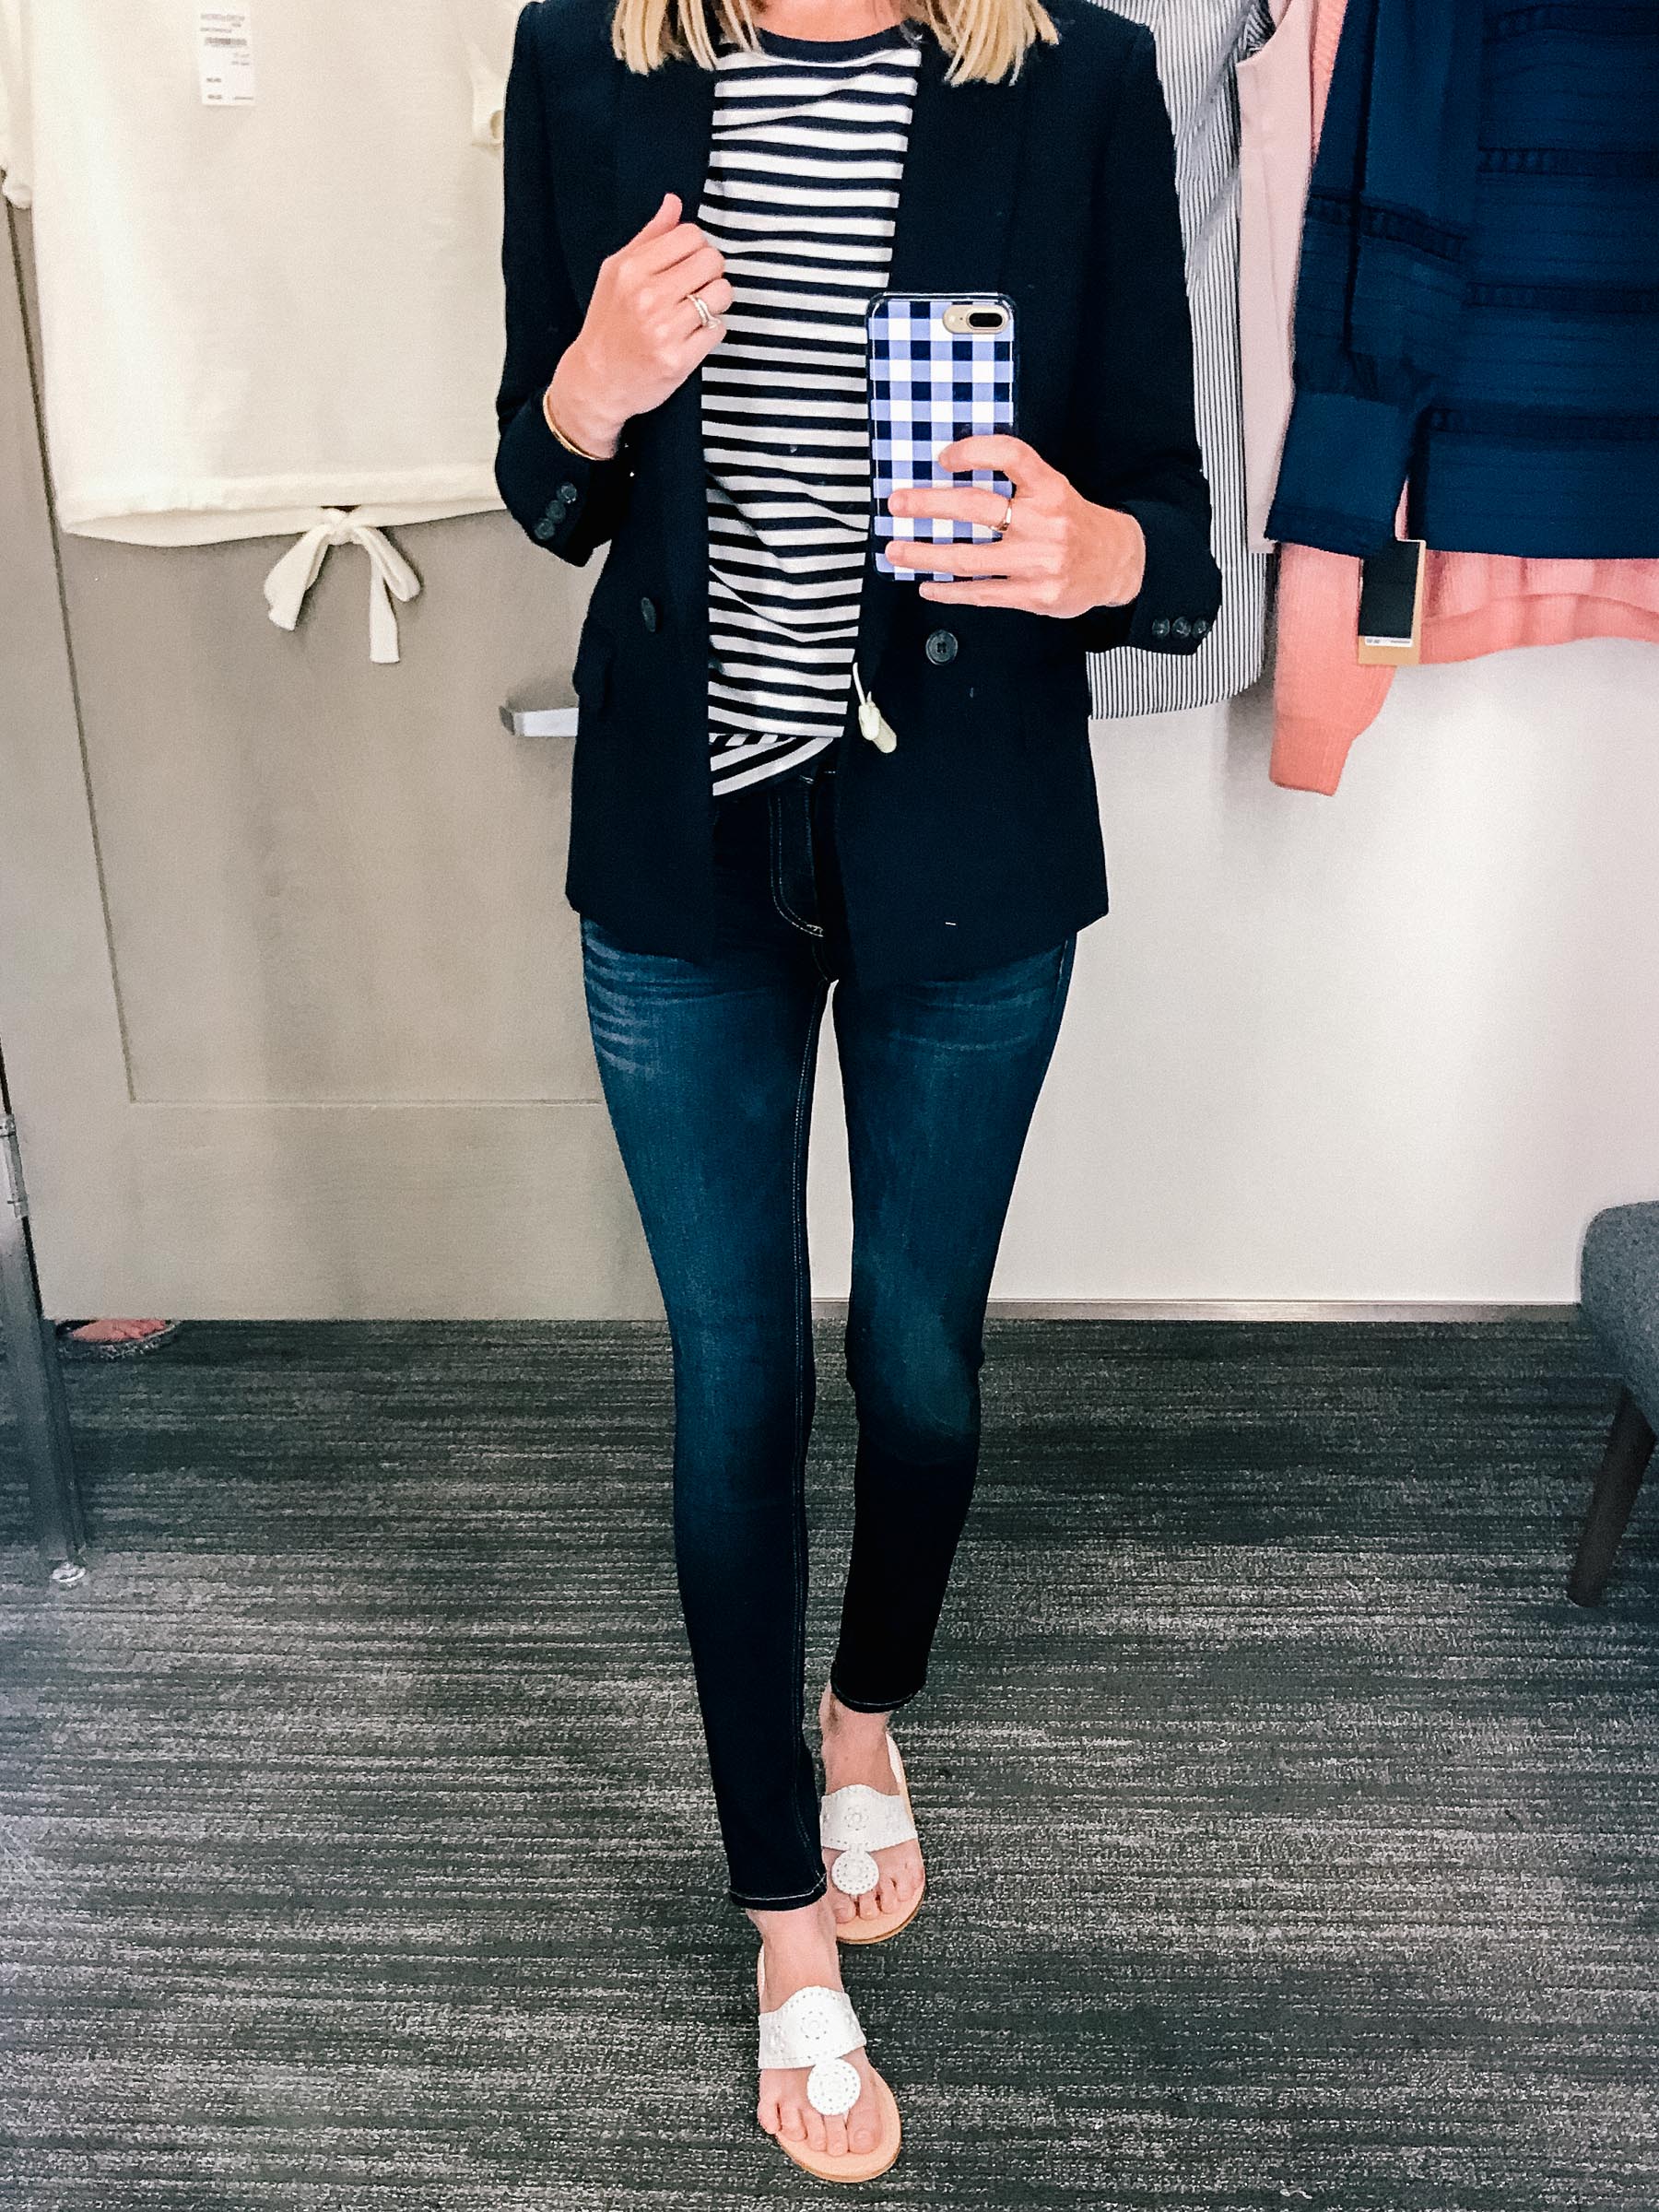 J.Crew Navy Blazer (I also recommend the Olivia Moon one! It's very cozy, since it's a knit material.) / 1901 Ringer Tee / Rag & Bone Skinny Jeans/ Monica Vinader Friendship Bracelet / Gingham Phone Case / Jack Rogers